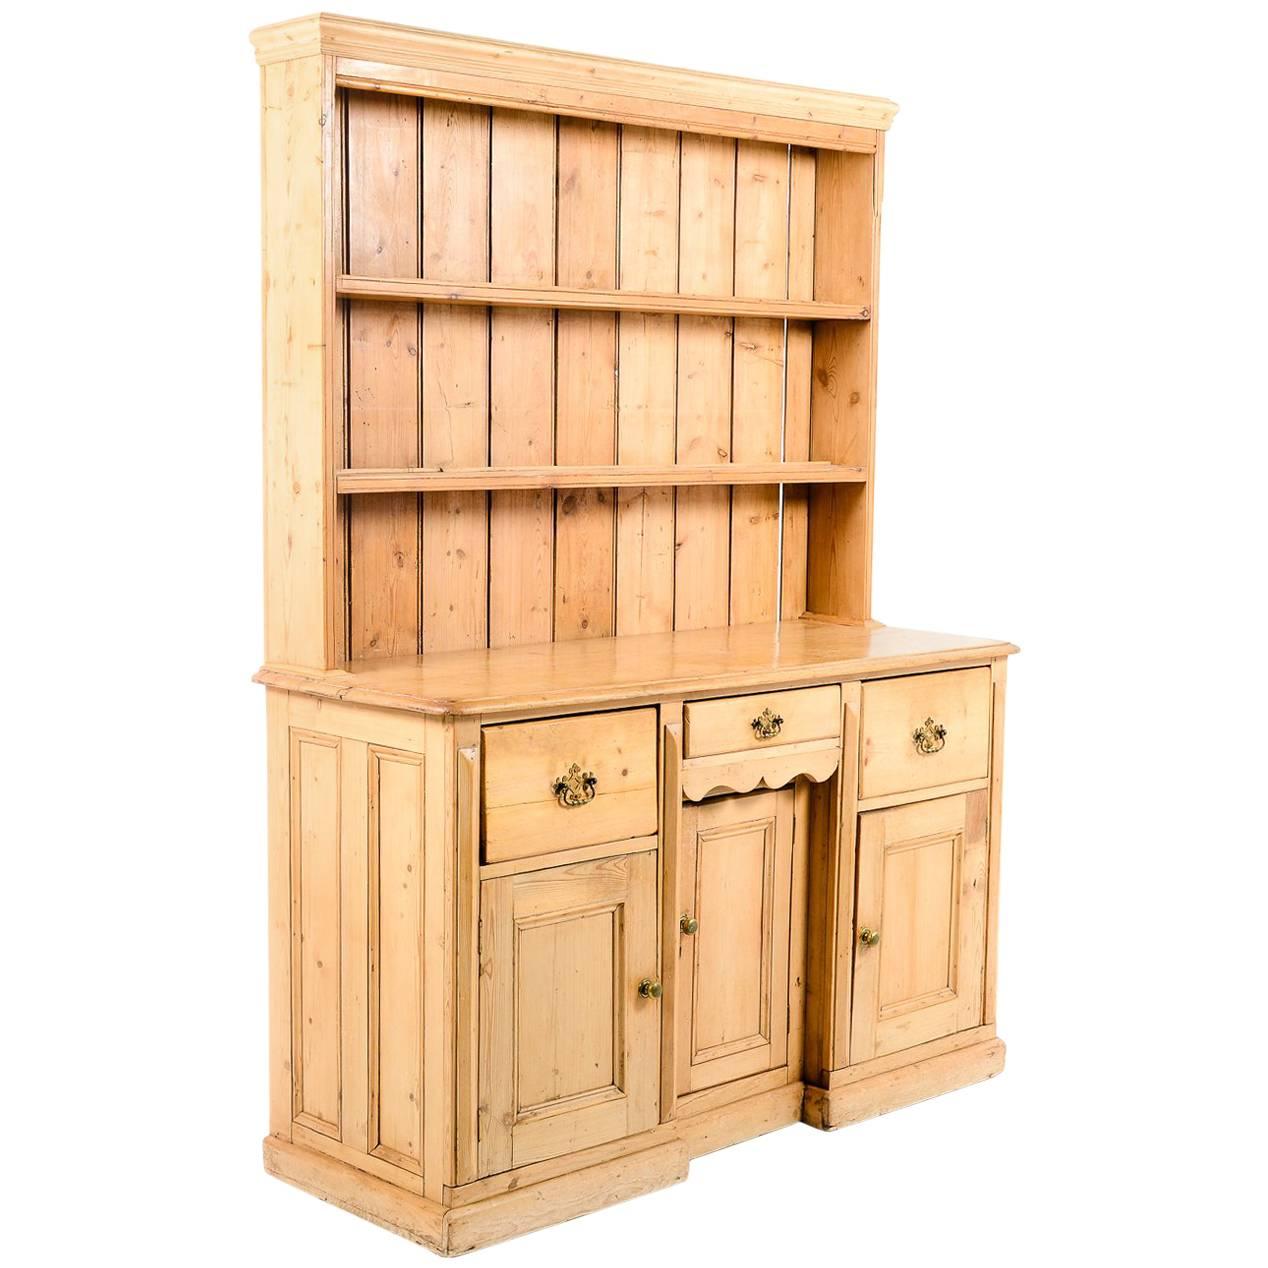 A charming antique 19th century solid pine country Welsh dresser, having three drawers over three cupboard doors, and open shelving above, circa 1850. Would be the focal point in a country kitchen or dining area.



